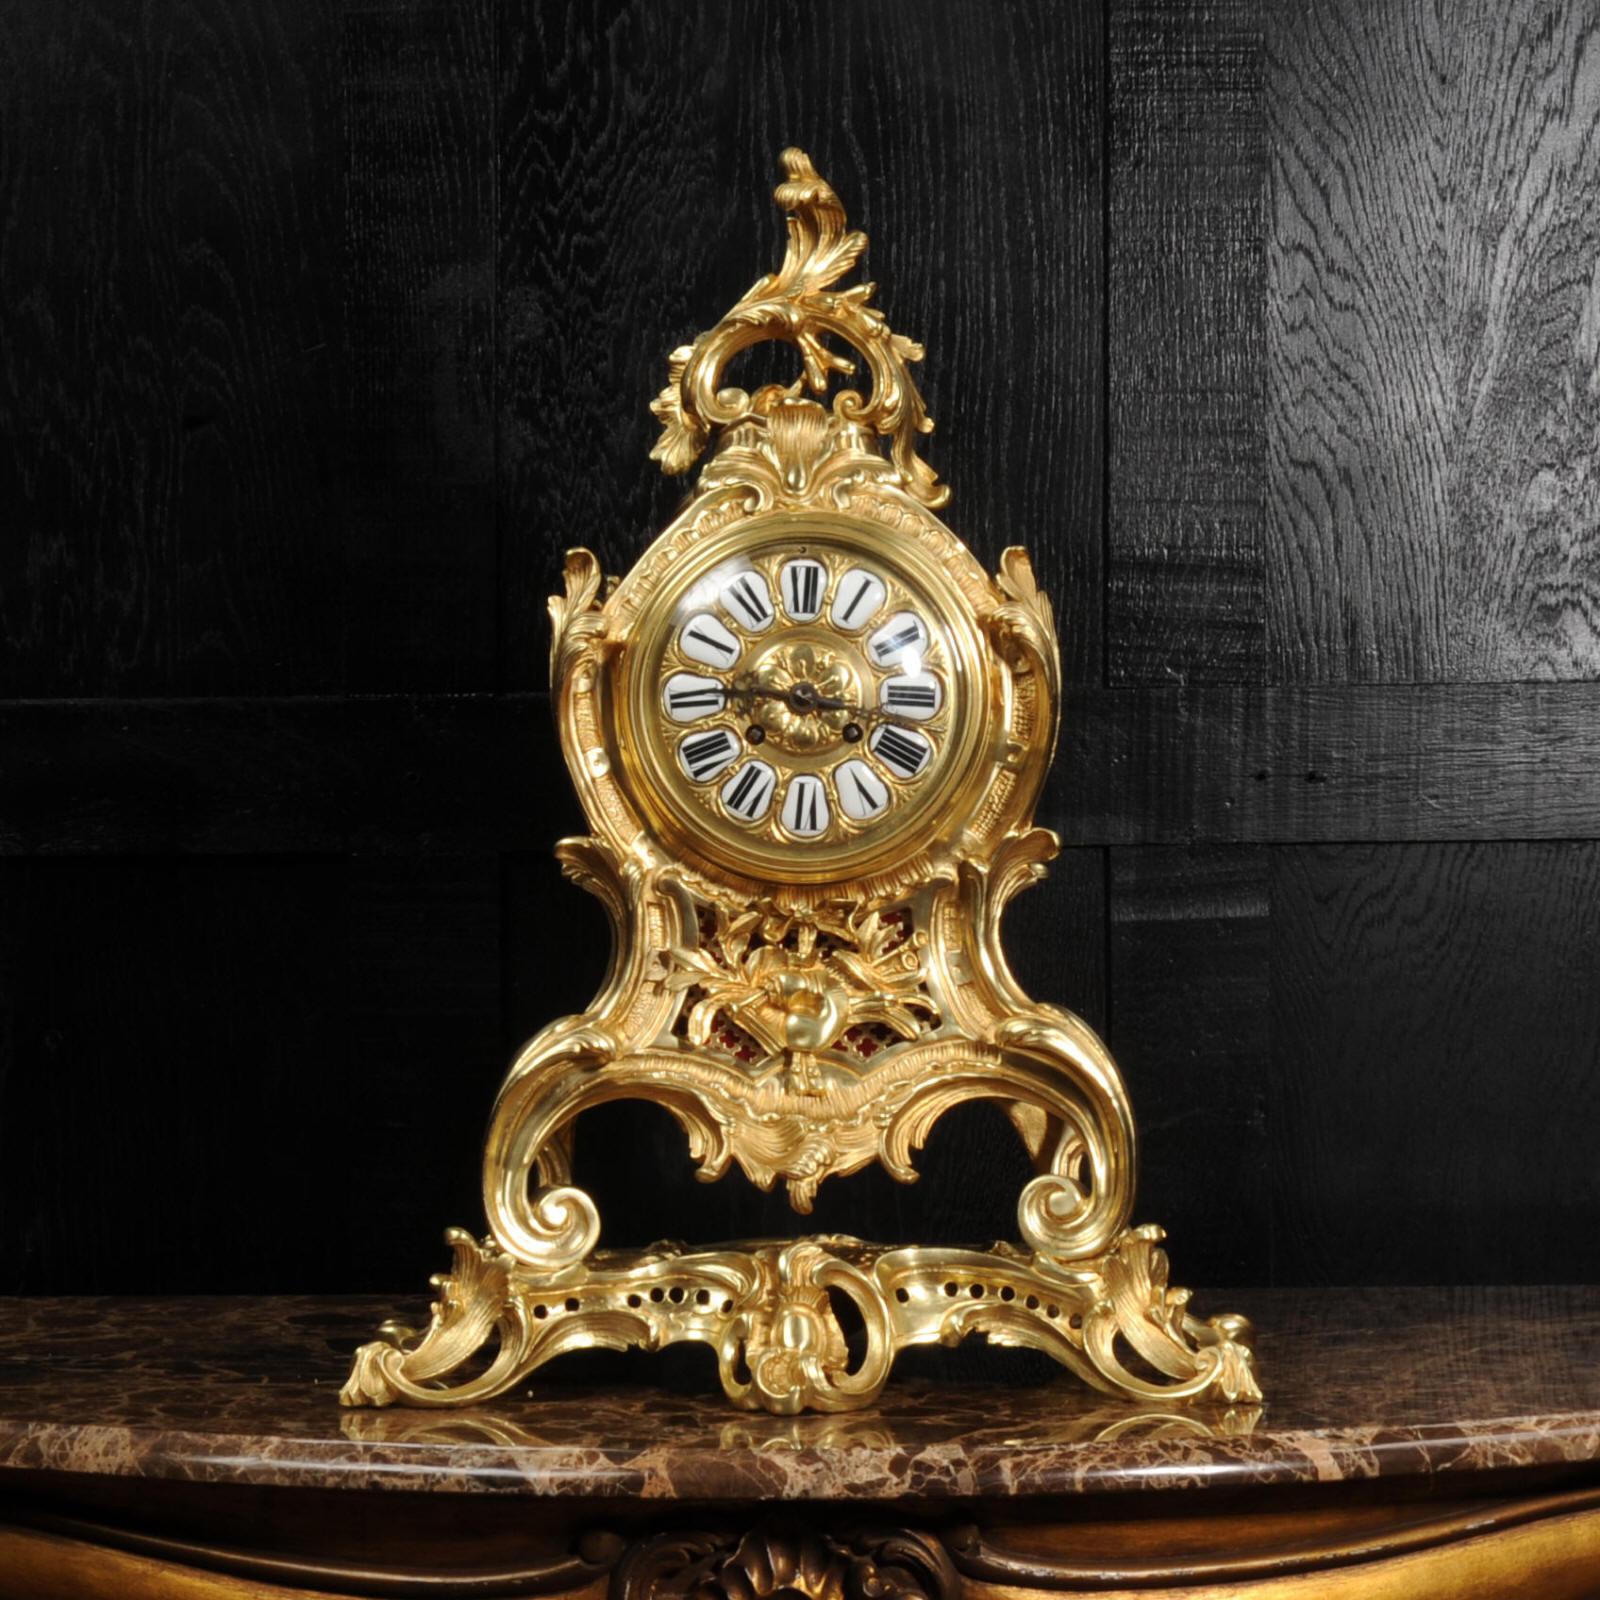 A Substantial and fine Rococo clock of gilded bronze, circa 1870. The case formed in the Louis XV style of bold scrolling acanthus standing upon a naturalistically modelled base. To the top, an arched Rococo flourish of scrolls and leaves. To the